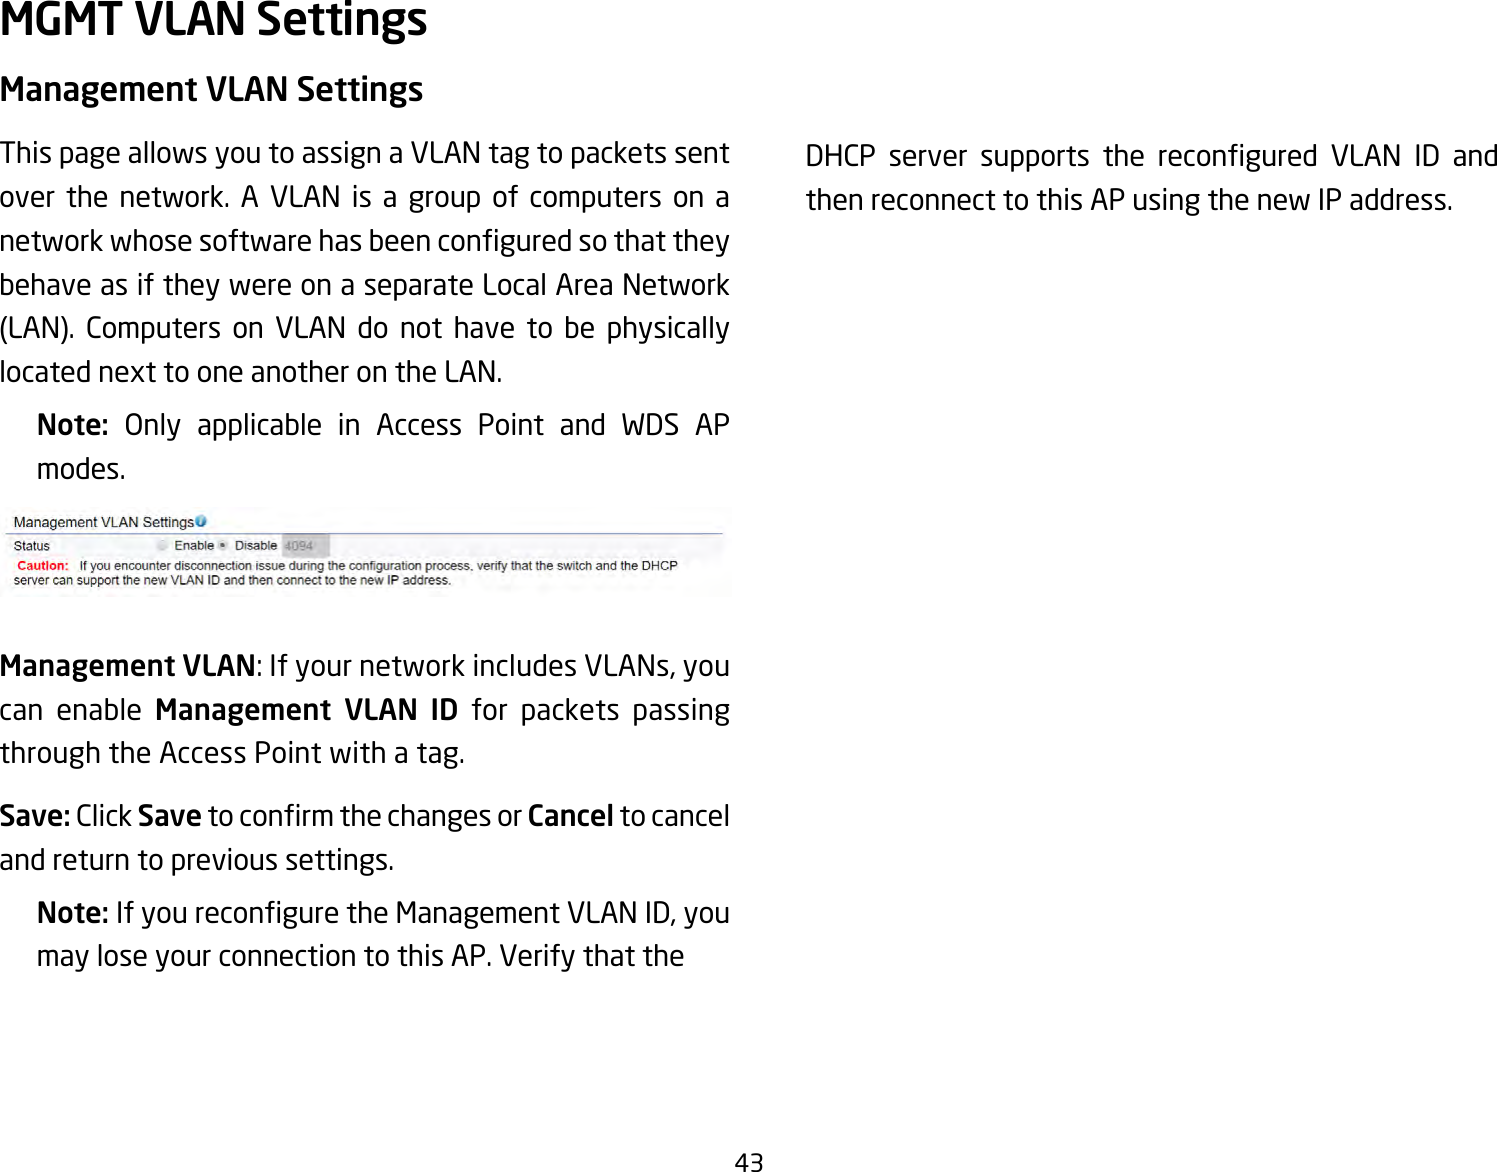 43Management VLAN SettingsThis page allows you to assign a VLAN tag to packets sent over the network. A VLAN is a group of computers on a networkwhosesoftwarehasbeenconguredsothattheybehave as if they were on a separate Local Area Network (LAN). Computers on VLAN do not have to be physically located next to one another on the LAN.Note:  Only applicable in Access Point and WDS AP modes.Management VLAN:IfyournetworkincludesVLANs,youcan enable Management VLAN ID for packets passing through the Access Point with a tag. Save: Click SavetoconrmthechangesorCancel to cancel and return to previous settings.Note: IfyoureconguretheManagementVLANID,youmay lose your connection to this AP. Verify that the   DHCP server supports the recongured VLAN ID andthen reconnect to this AP using the new IP address. MGMT VLAN Settings